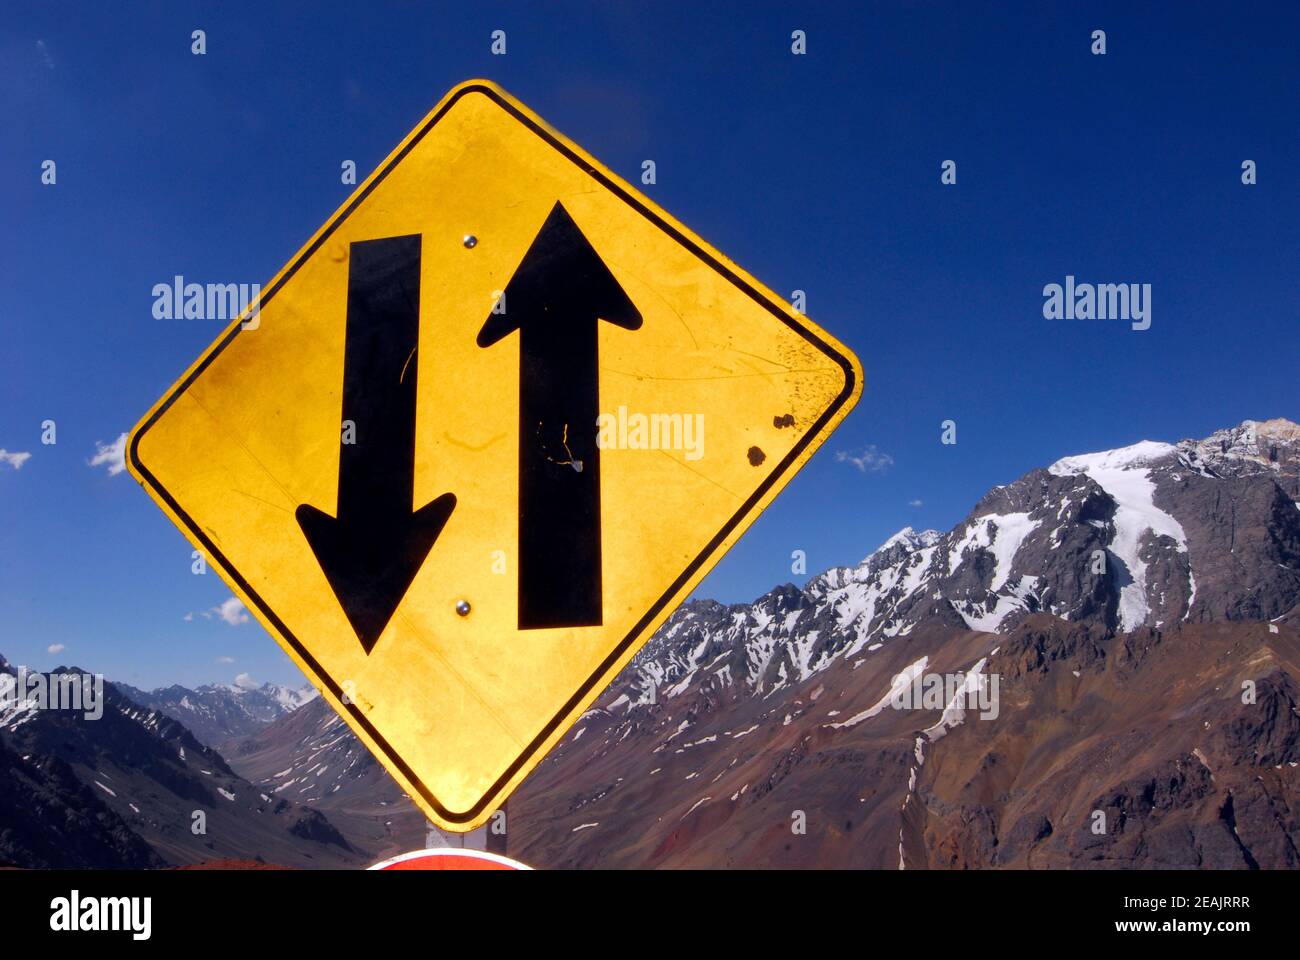 contraflow lane traffic sign or road sign Stock Photo